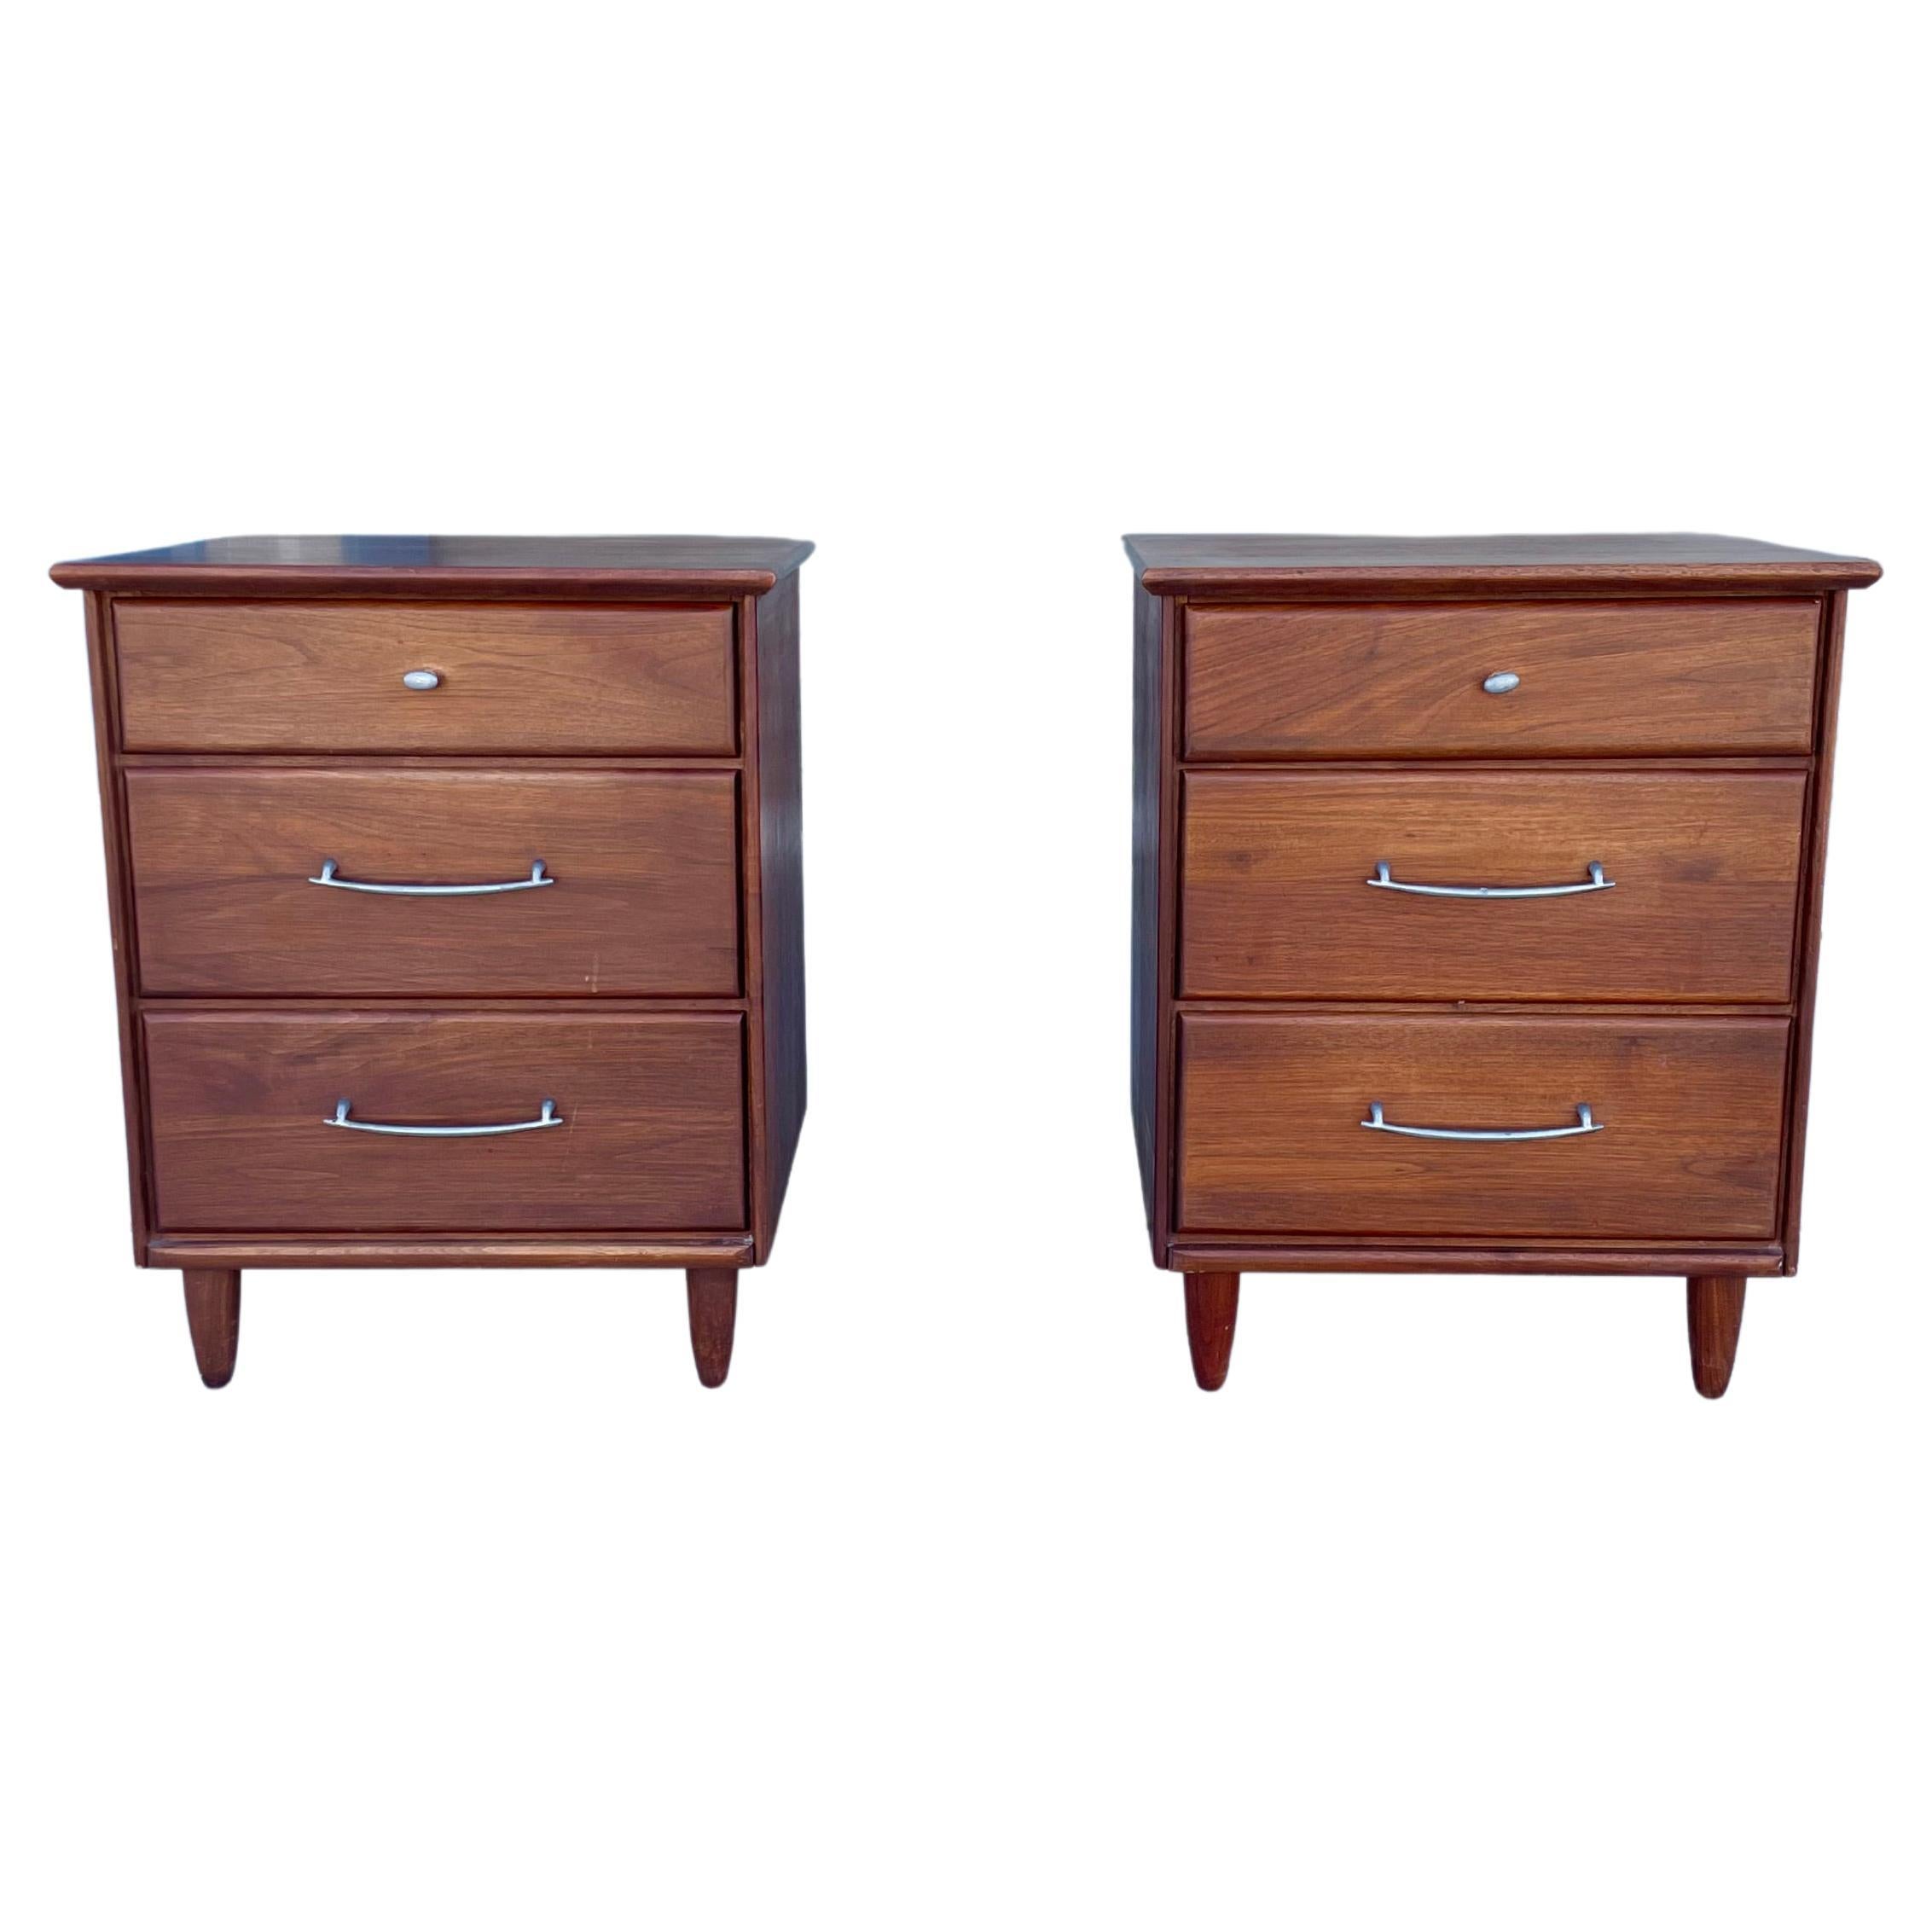 1960s Mid Century Walnut Nightstands by Ace- Hi - a Pair